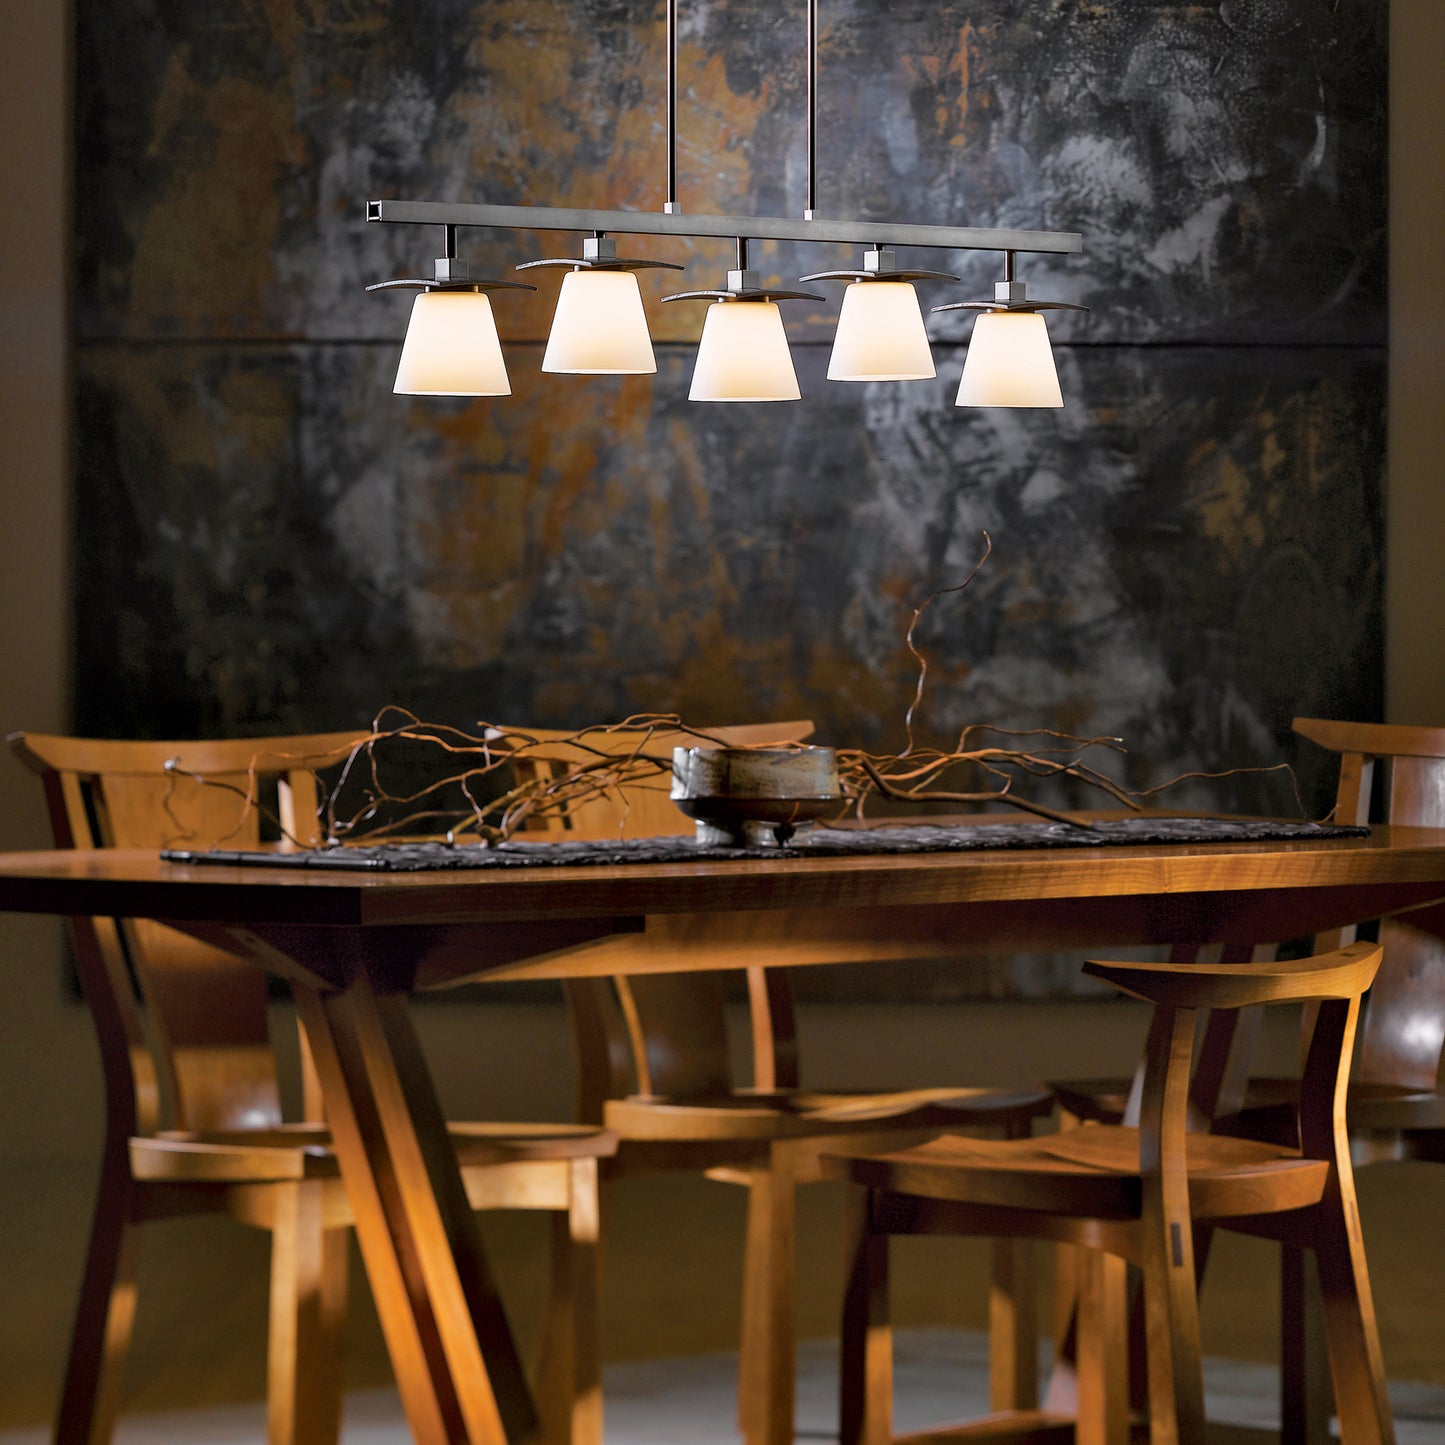 Enhance your dining experience with the exquisite Hubbardton Forge Wren 5-Light Pendant, handcrafted in Vermont by renowned artisans at Hubbardton Forge lighting. This stunning piece will elevate your dining room ambiance.